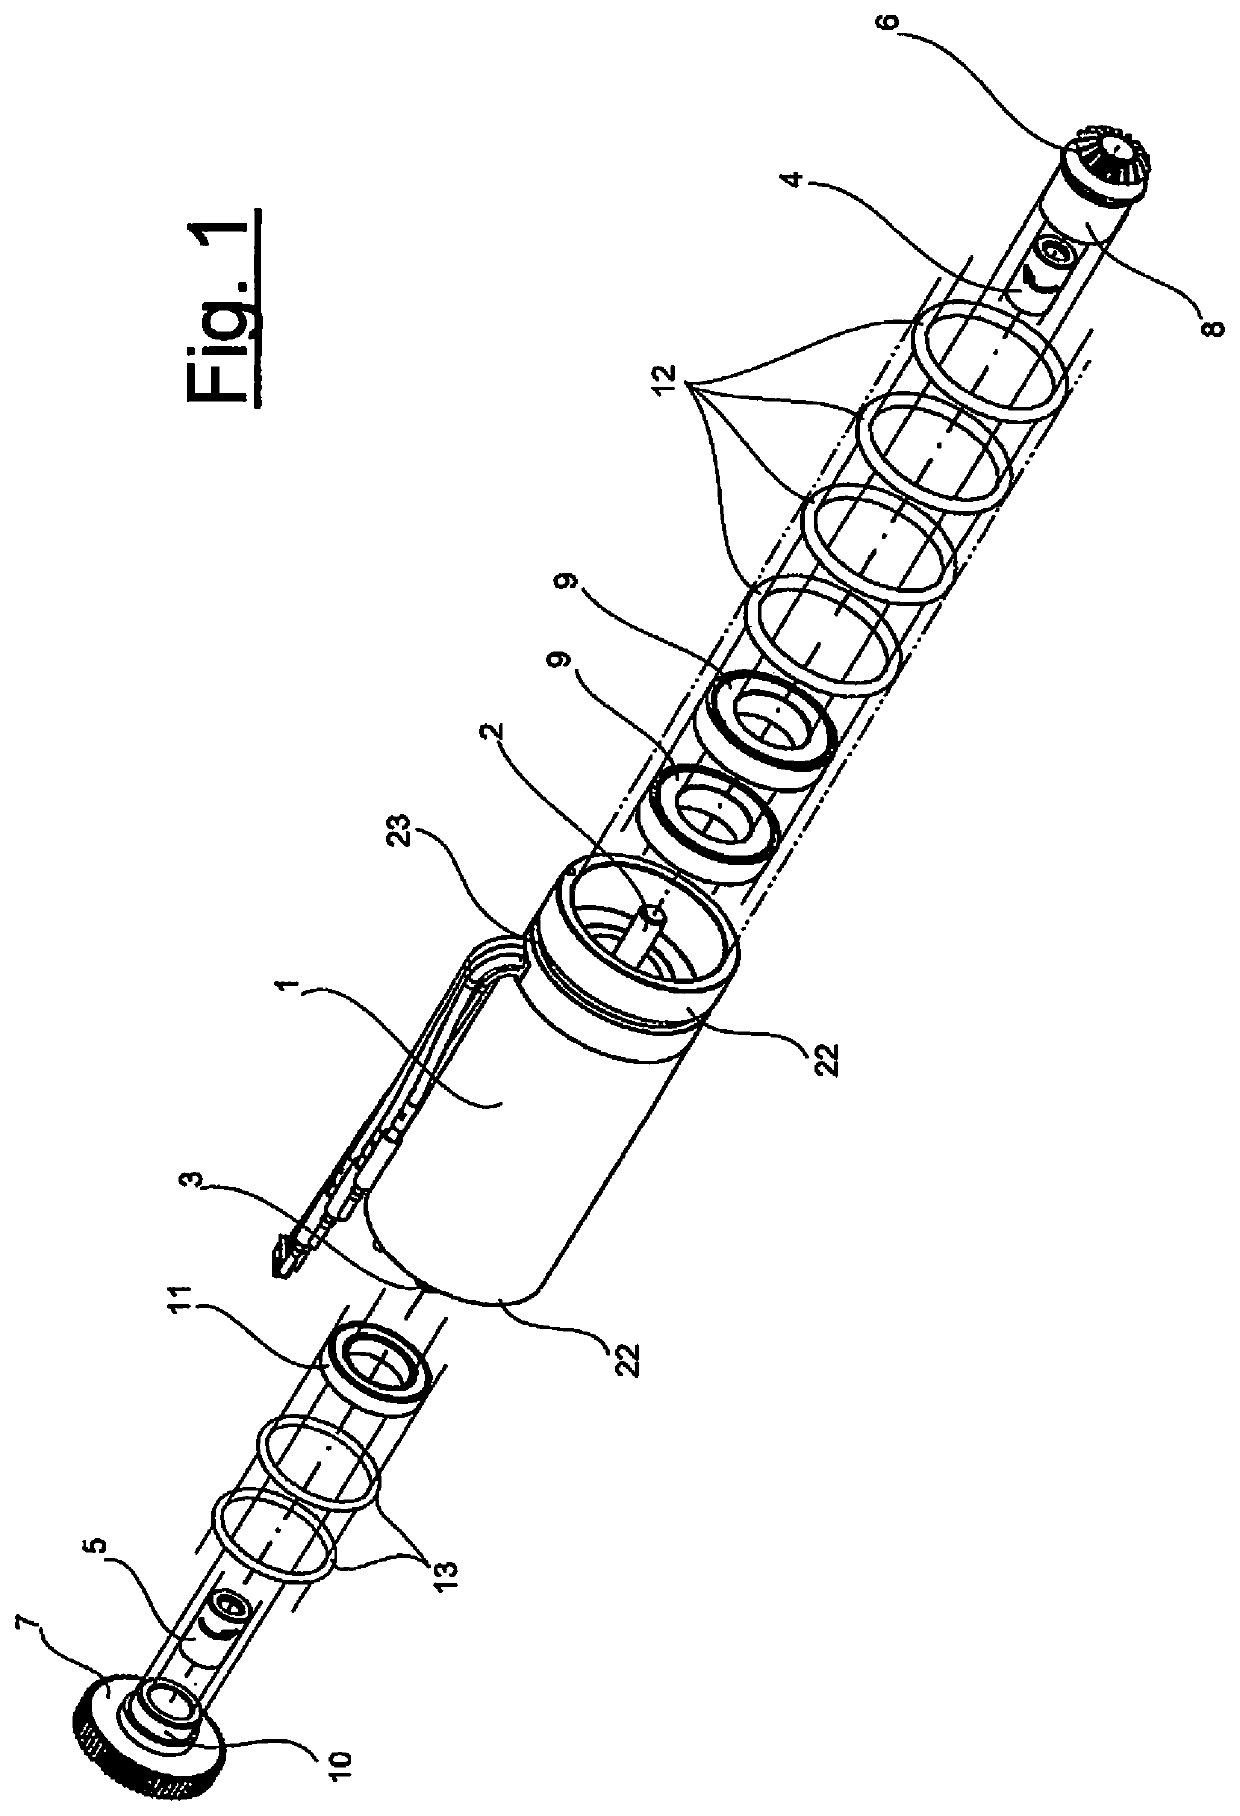 Drive unit for a strapping device